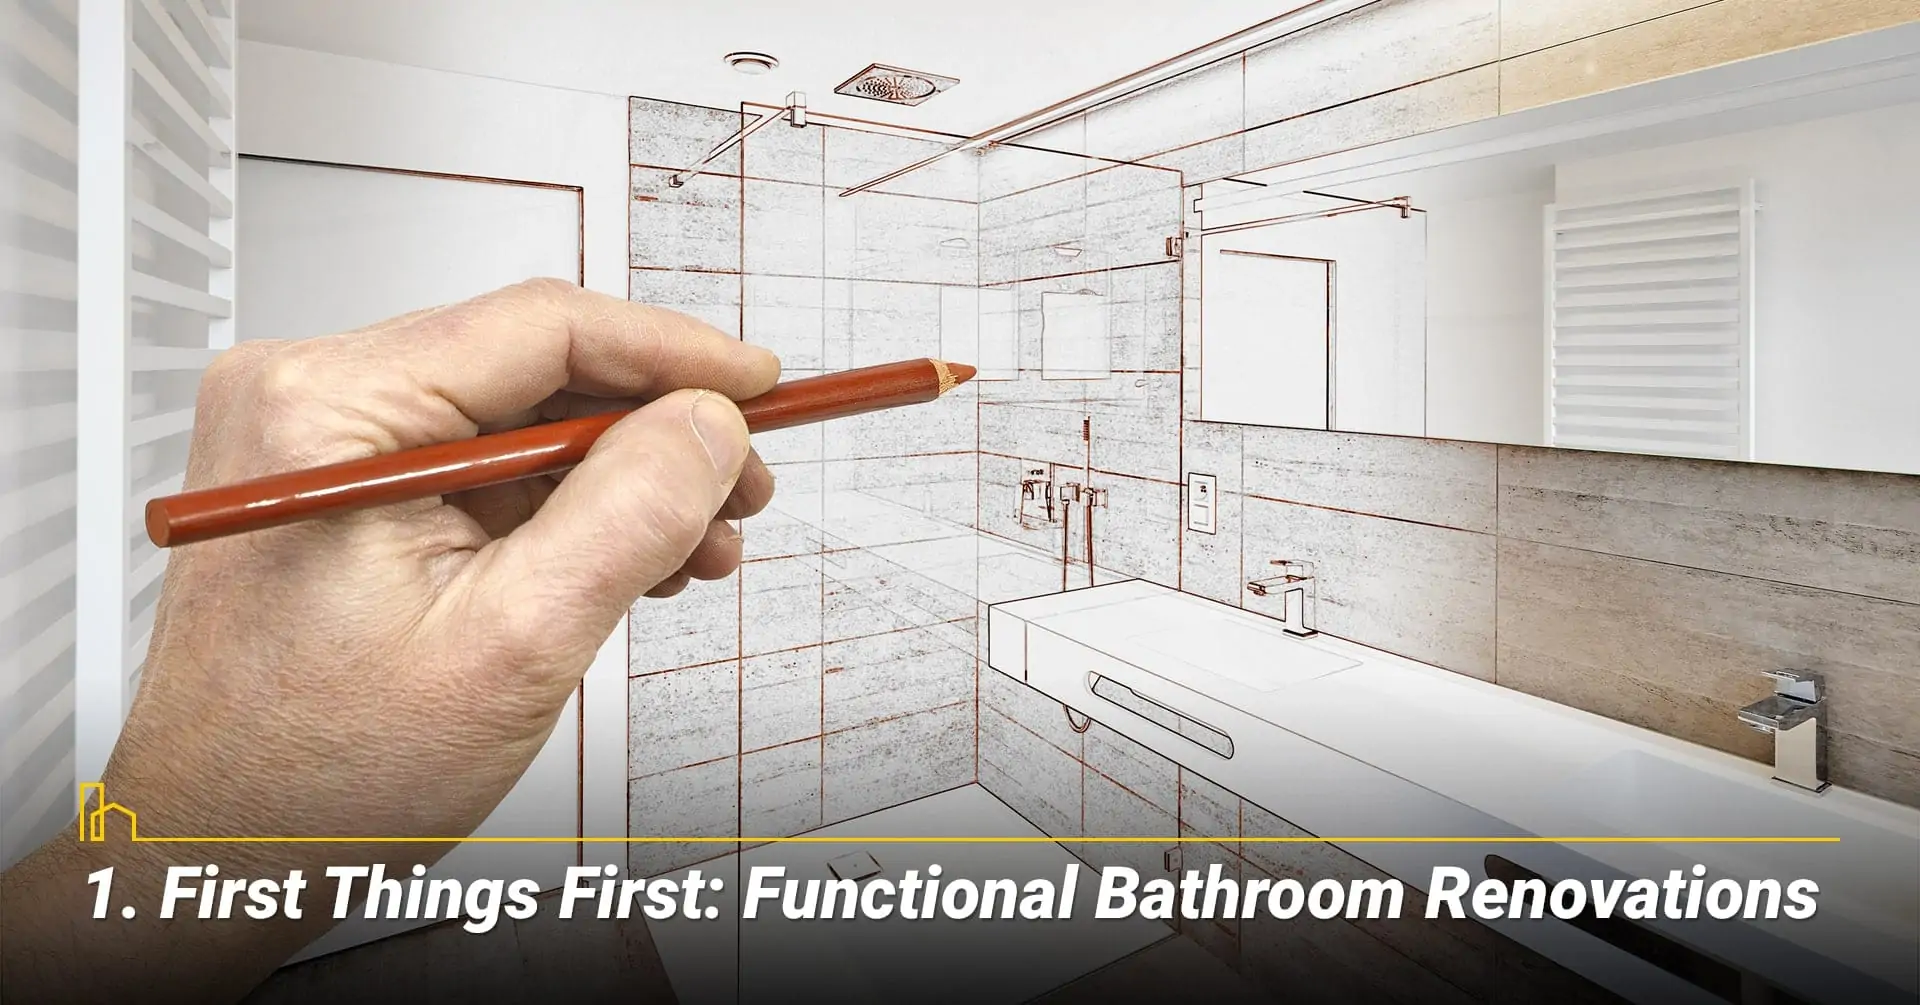 First Things First: Functional Bathroom Renovations, upgrade your bathroom